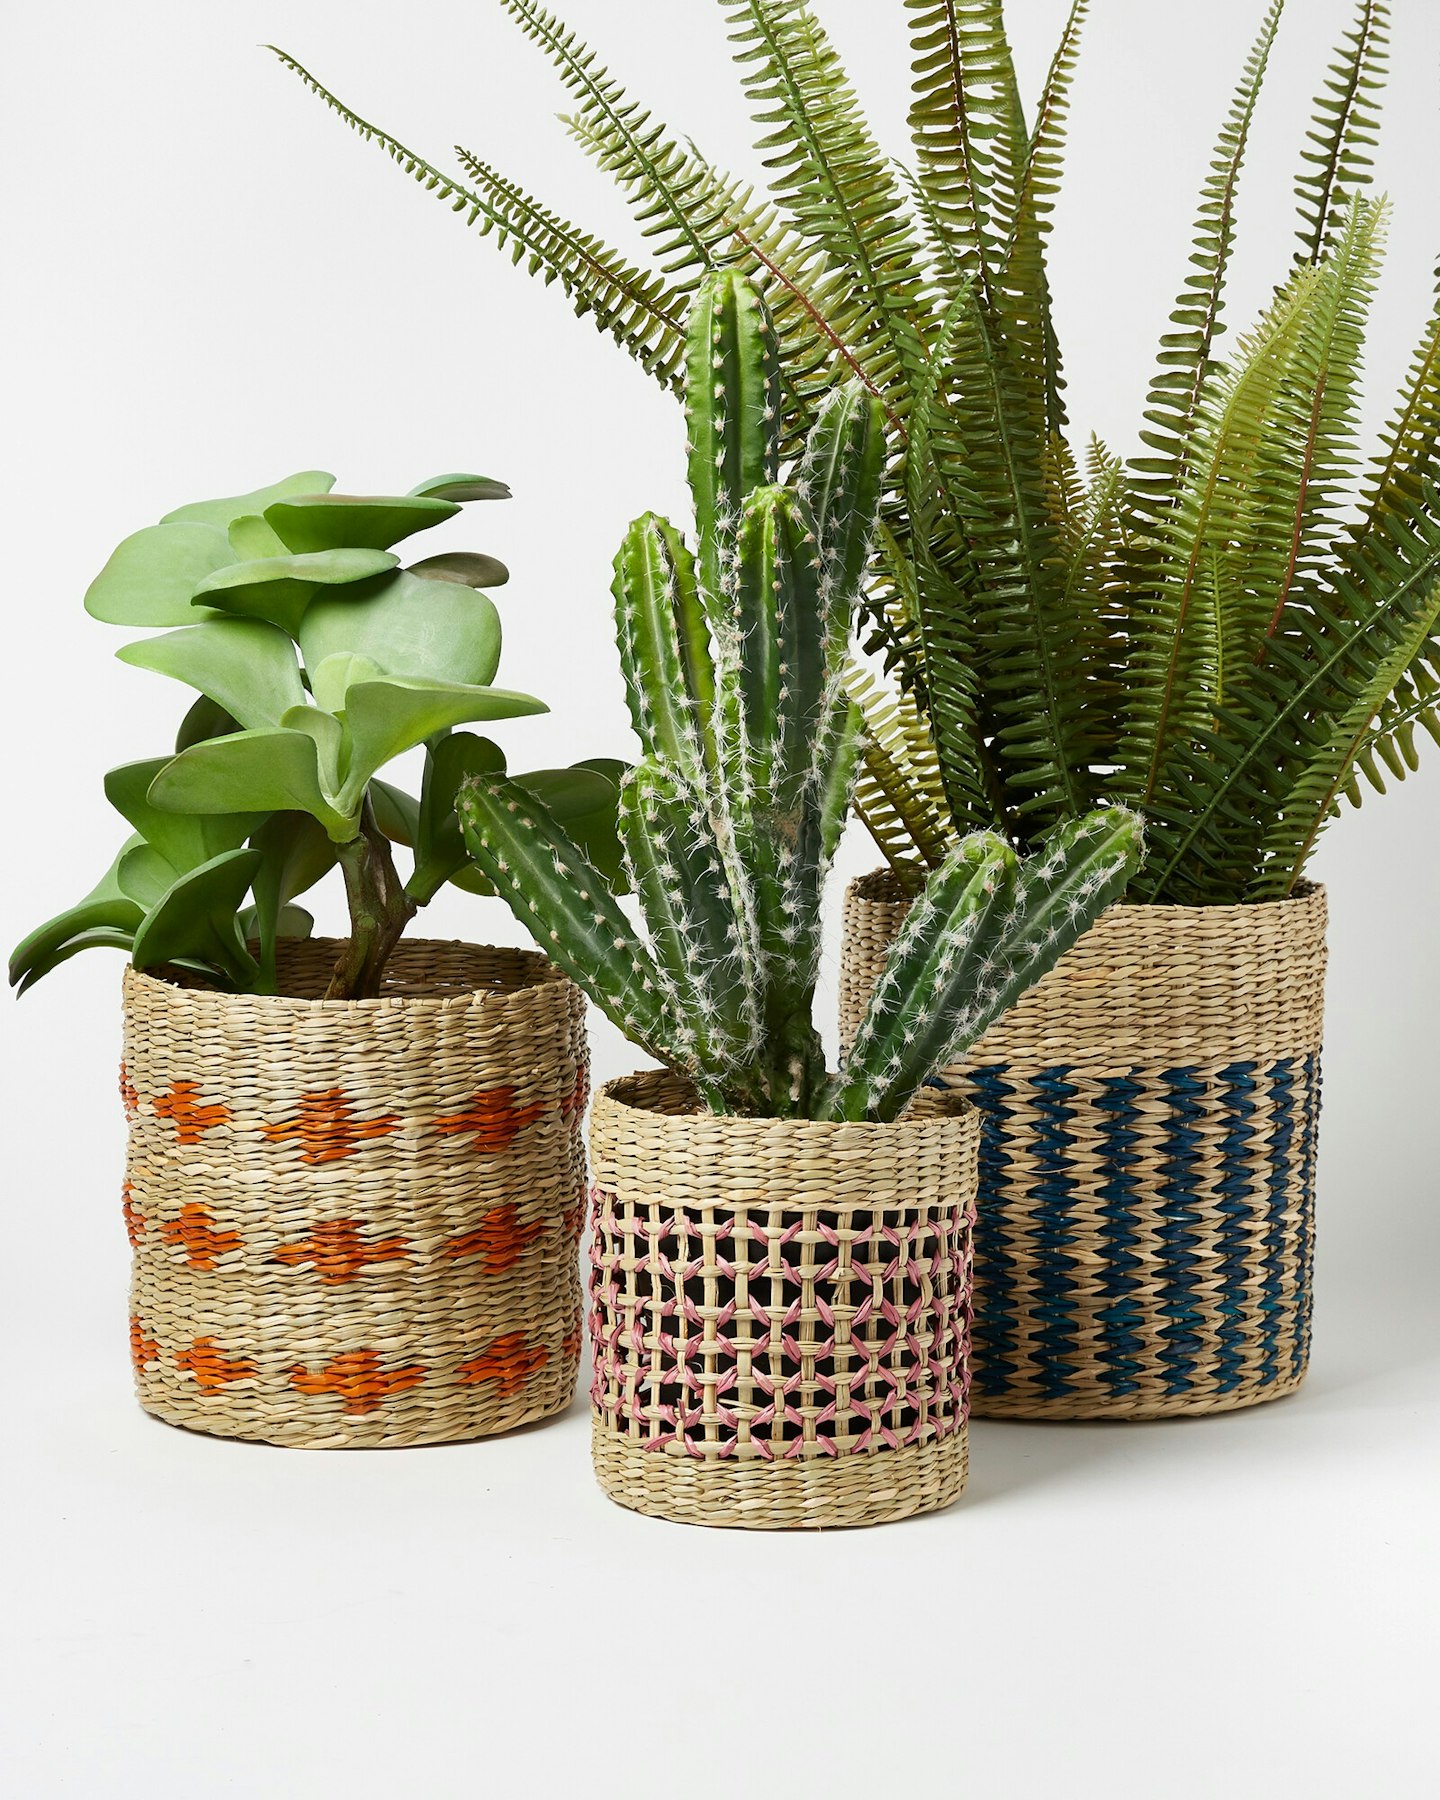 Lunchtime shop Wednesday - Oliver Bonas, Seagrass Plant Pot Covers Set of Three, £32.50